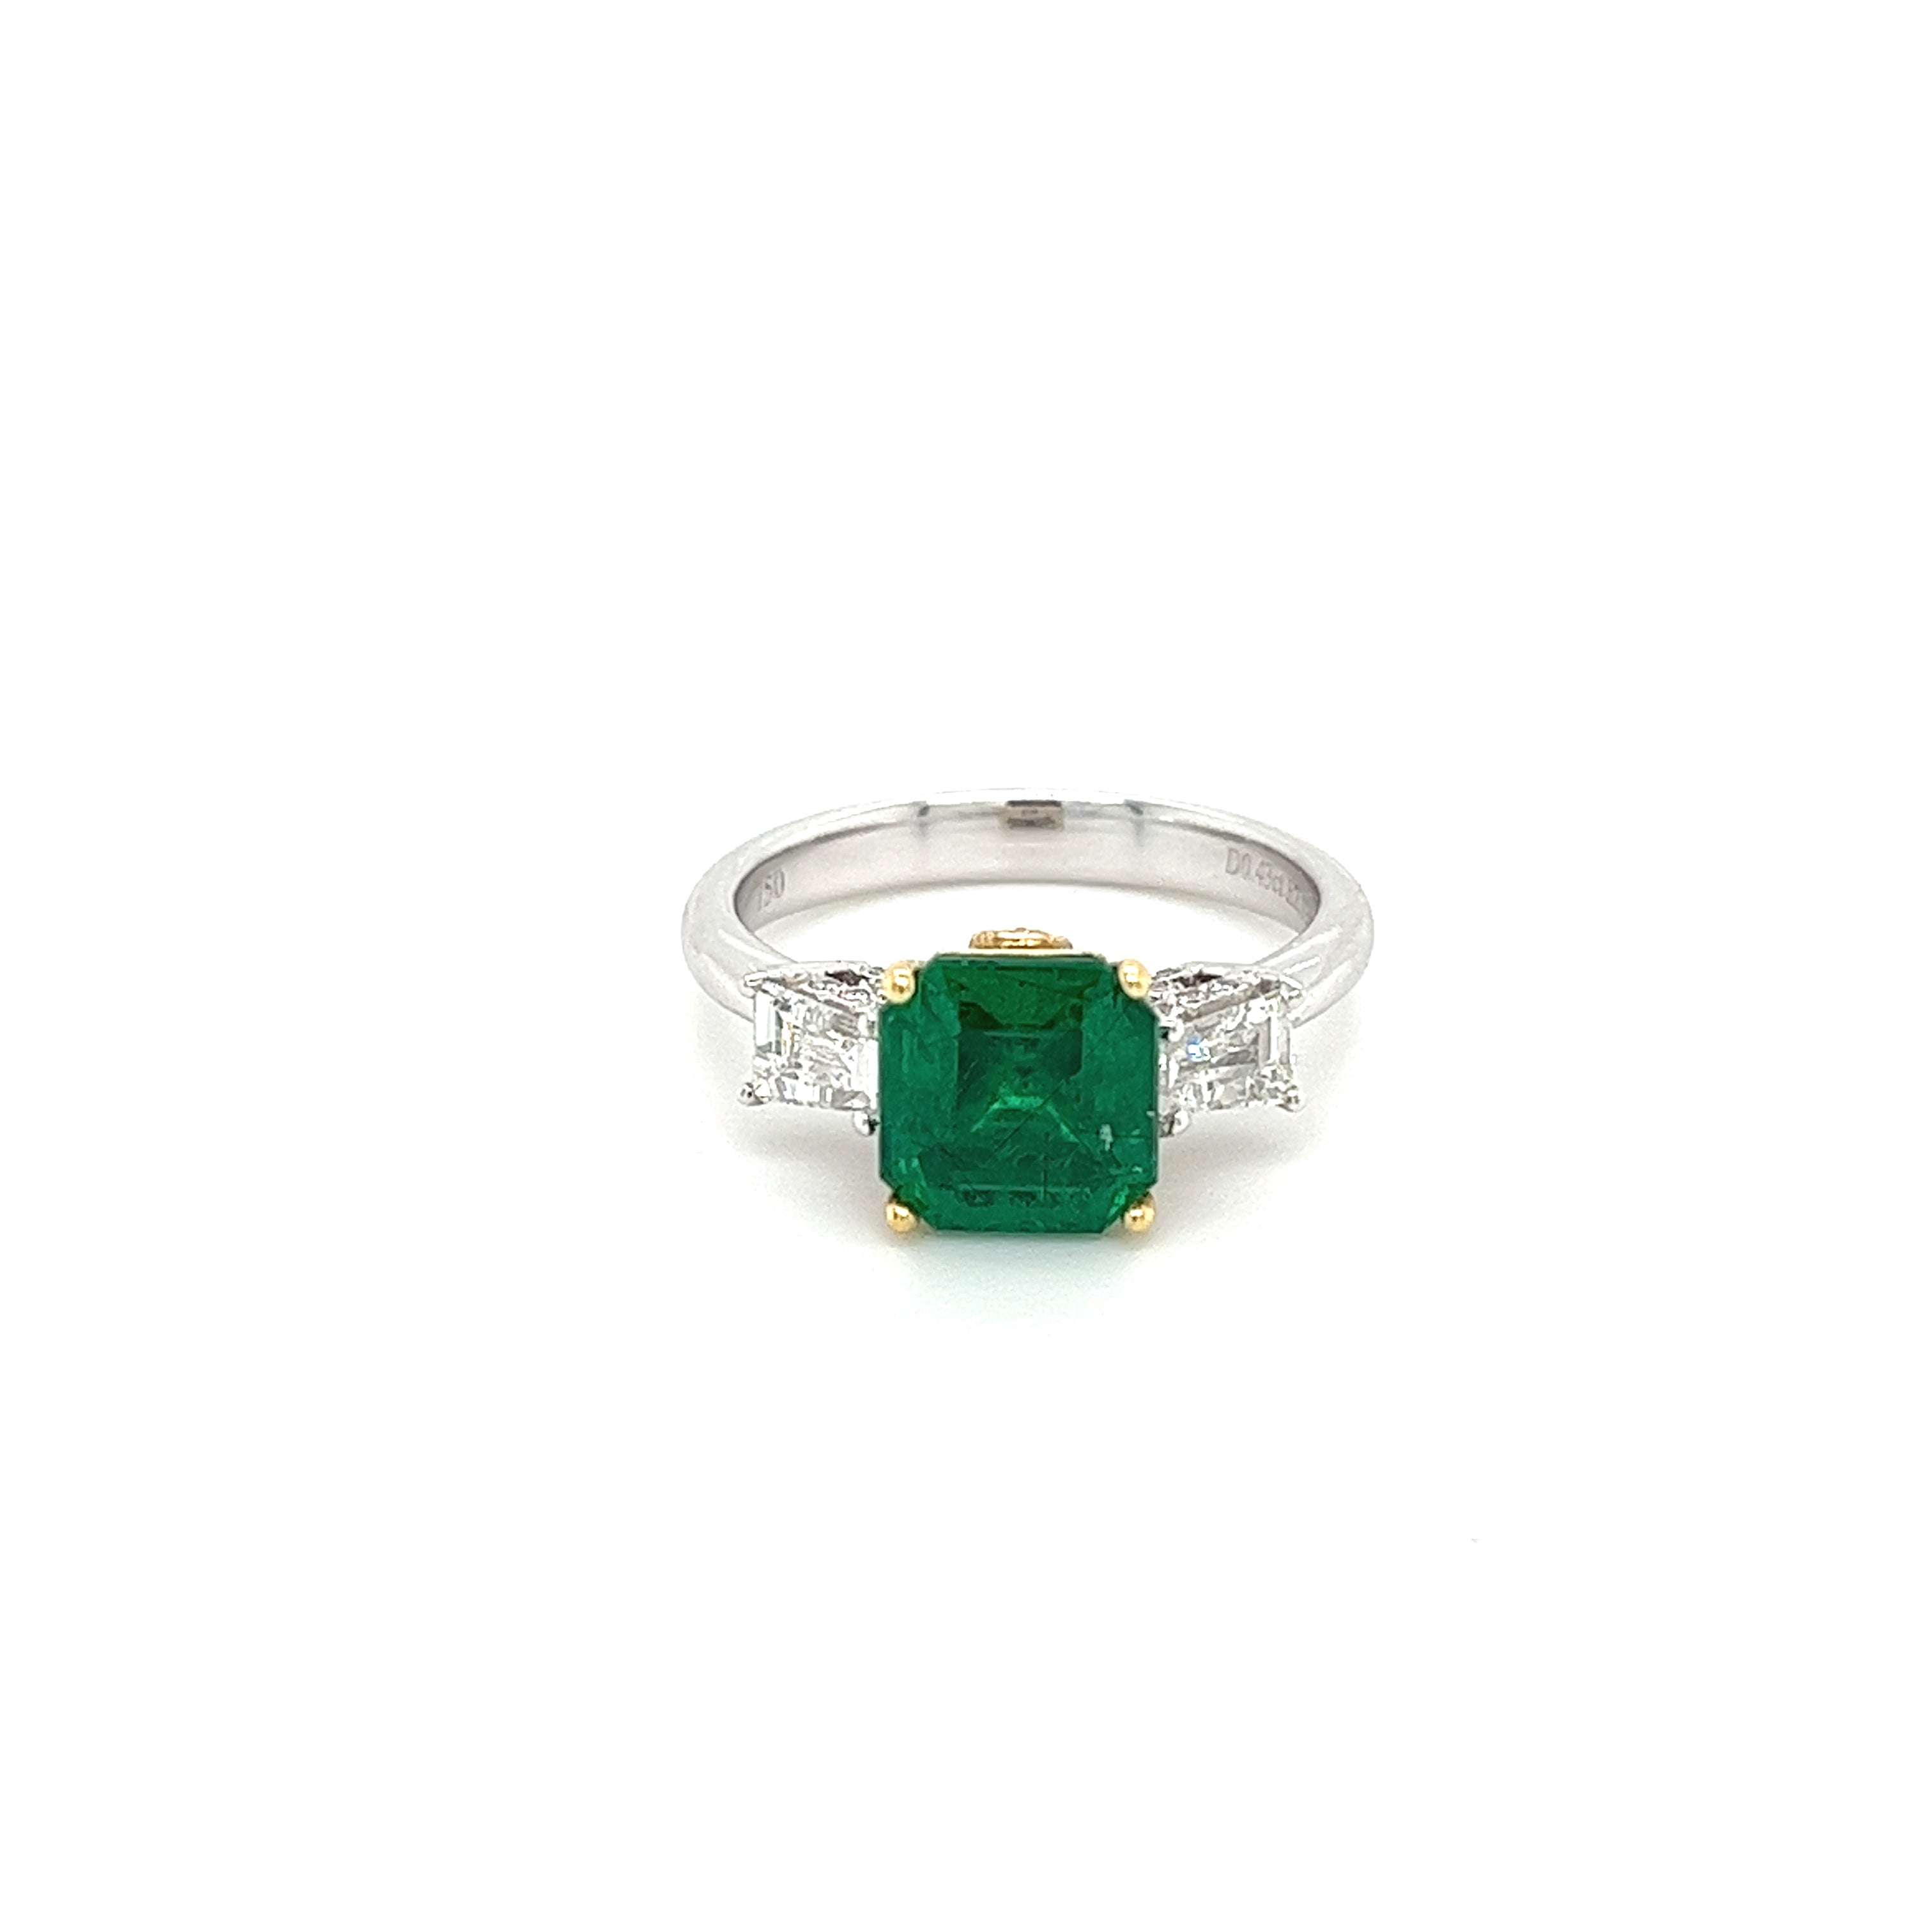 2_19-Carat-Natural-Emerald-3-Stone-Ring-with-Baguette-Diamond-in-18K-White-Gold-Rings-2.jpg